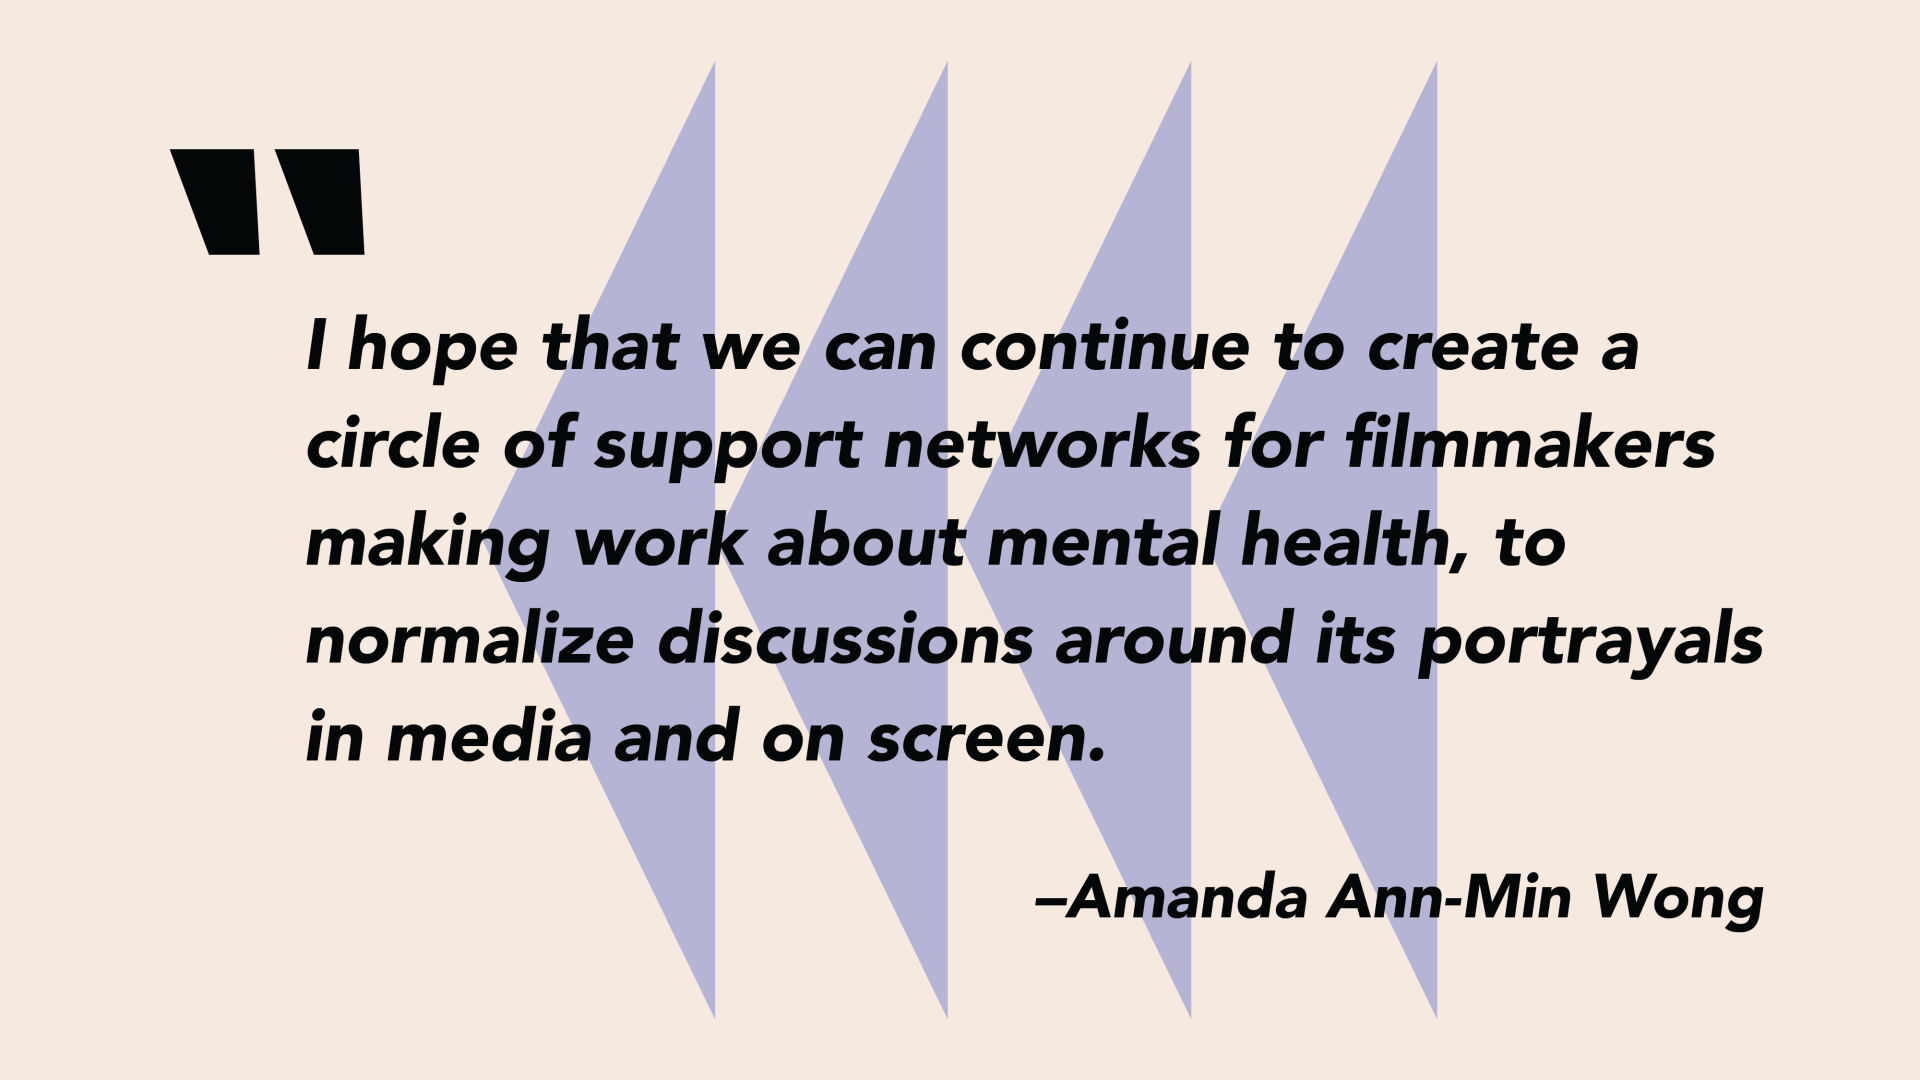 An off white graphic with purple triangles in the background and a quote overlaid by Amanda Ann-Min Wong that says "I hope that we can continue to create a circle of support networks for filmmakers making work about mental health, to normalize discussions around its portrayals in media and on screen."